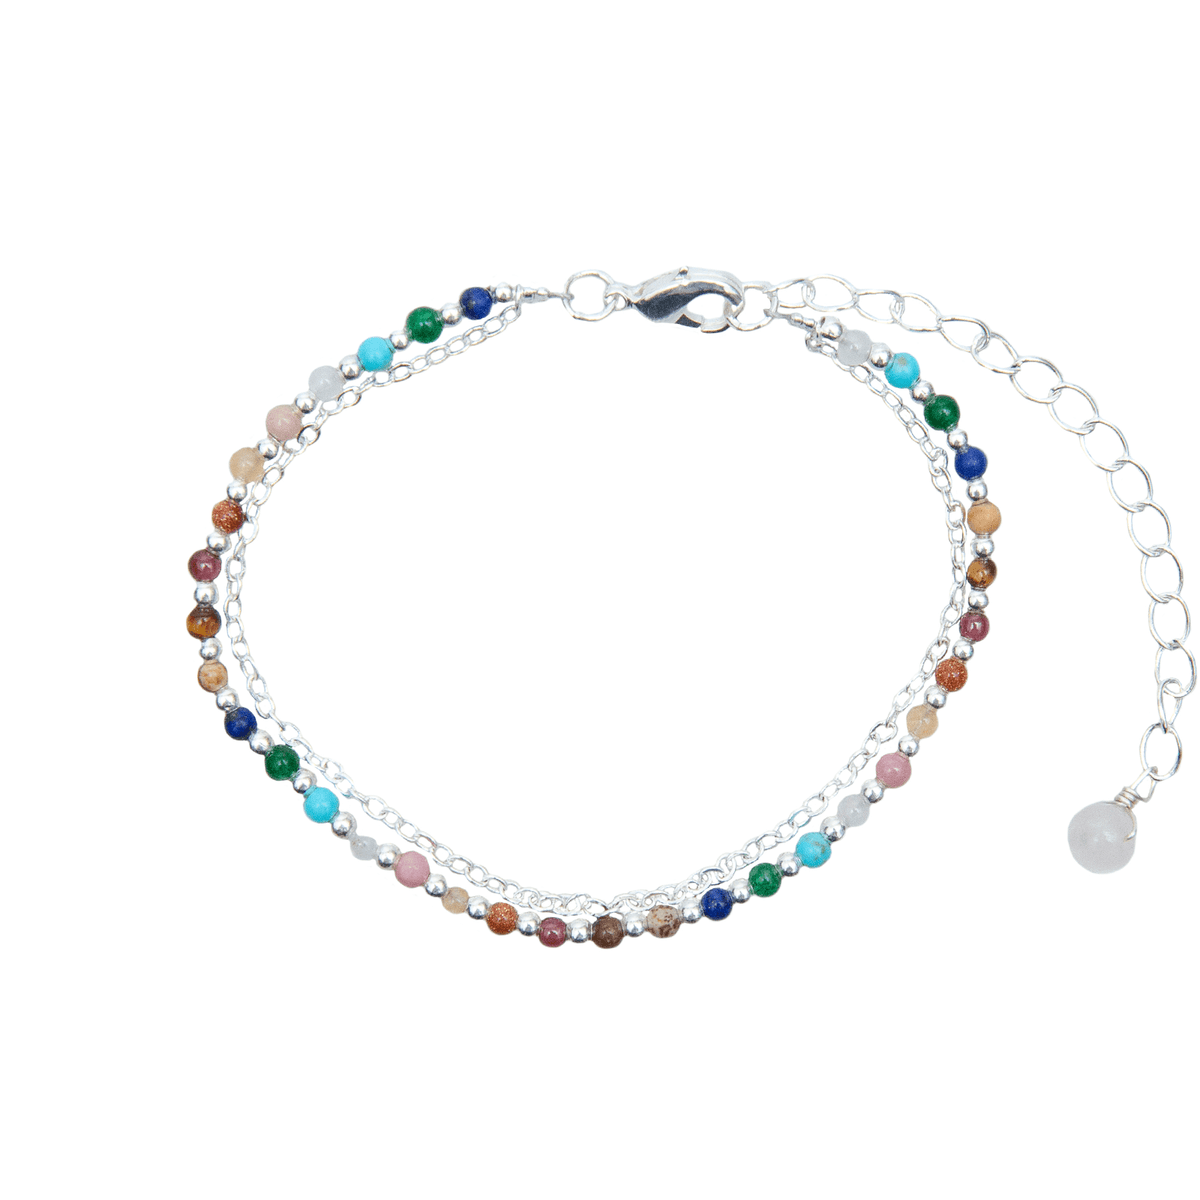 Layered bracelet with rainbow stone and silver bead bracelet and a dainty silver chain bracelet